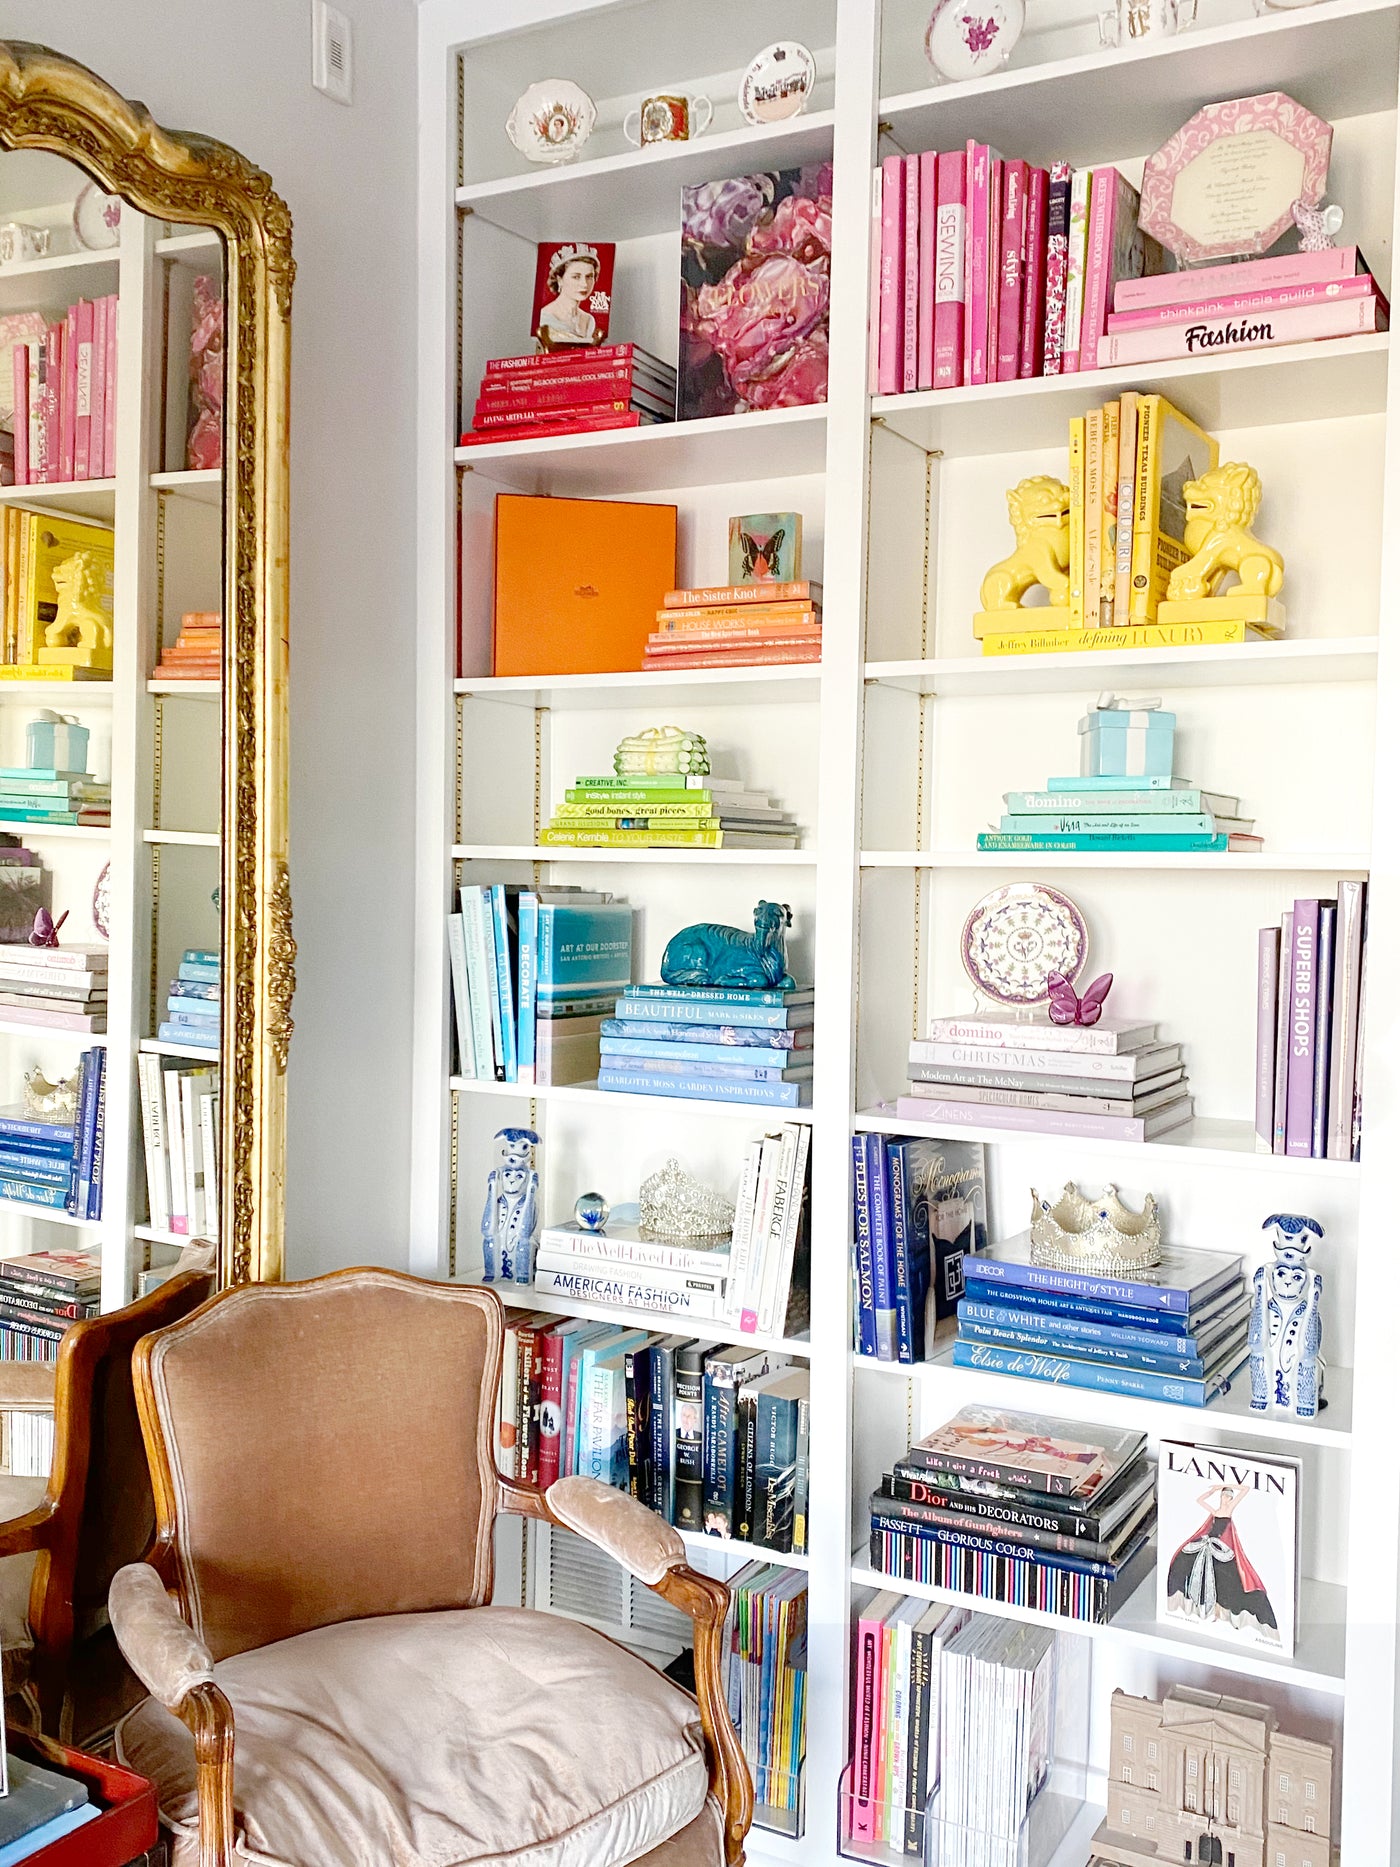 The Home Edit - The Home Edit Founders Share Their Top Organizing